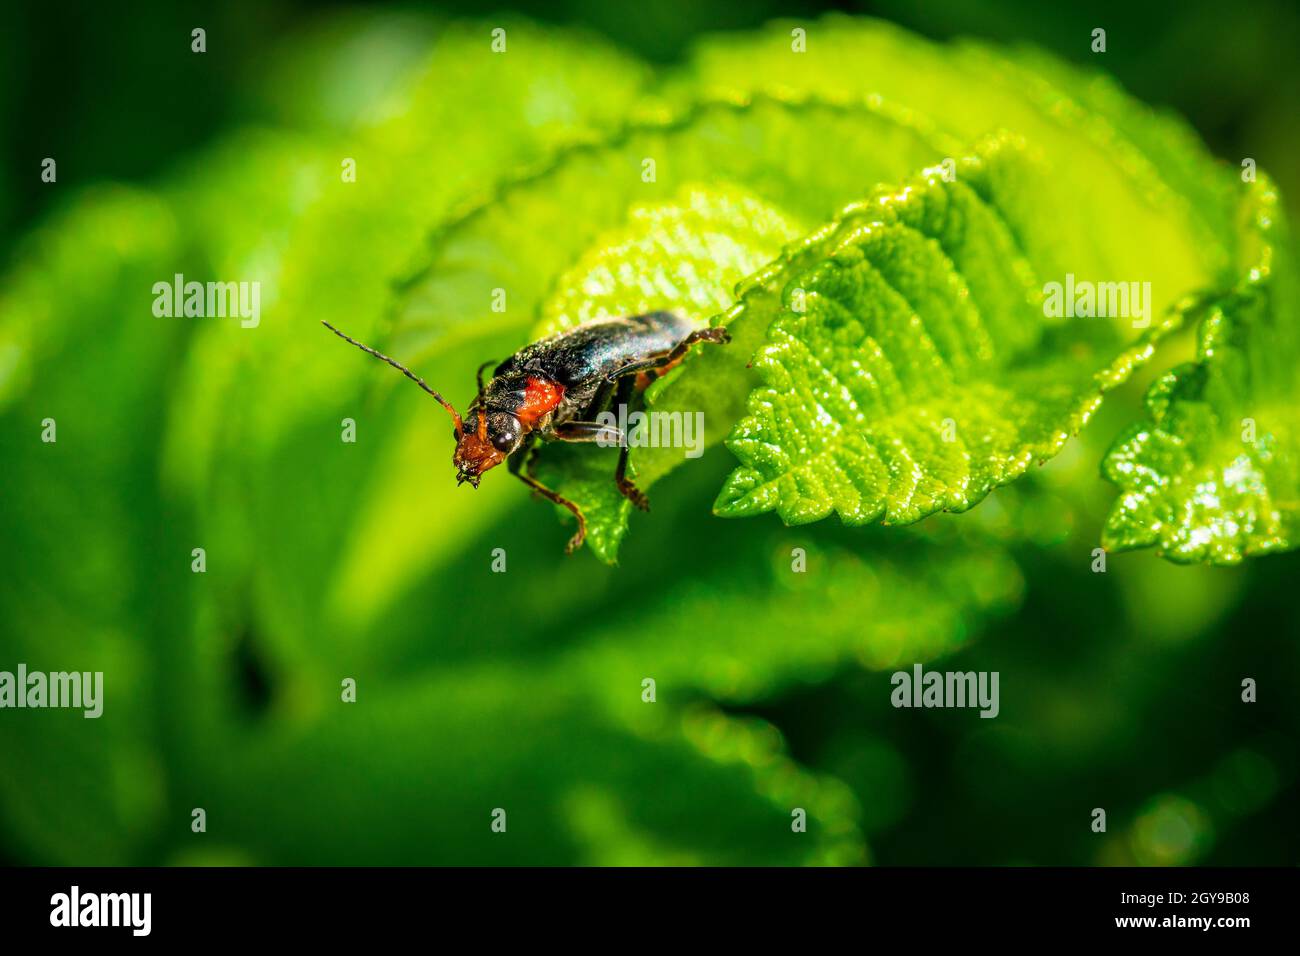 Soldier beetle (Cantharis livida) sitting on a leaf. Small black and red bug in its habitat. Stock Photo